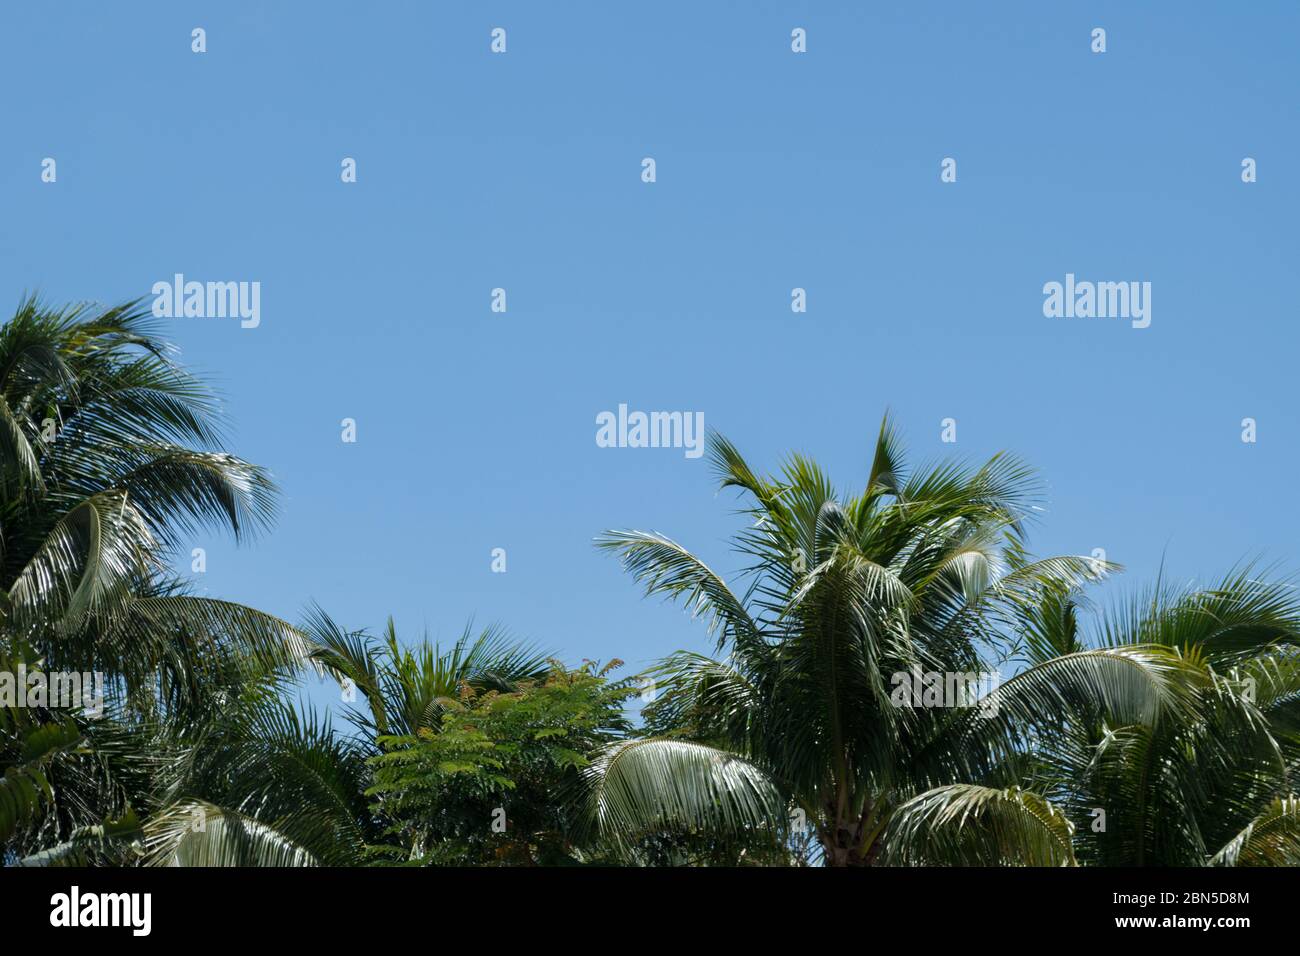 Palm trees sway in the breeze under a bright blue clear sky in the Caribbean Stock Photo